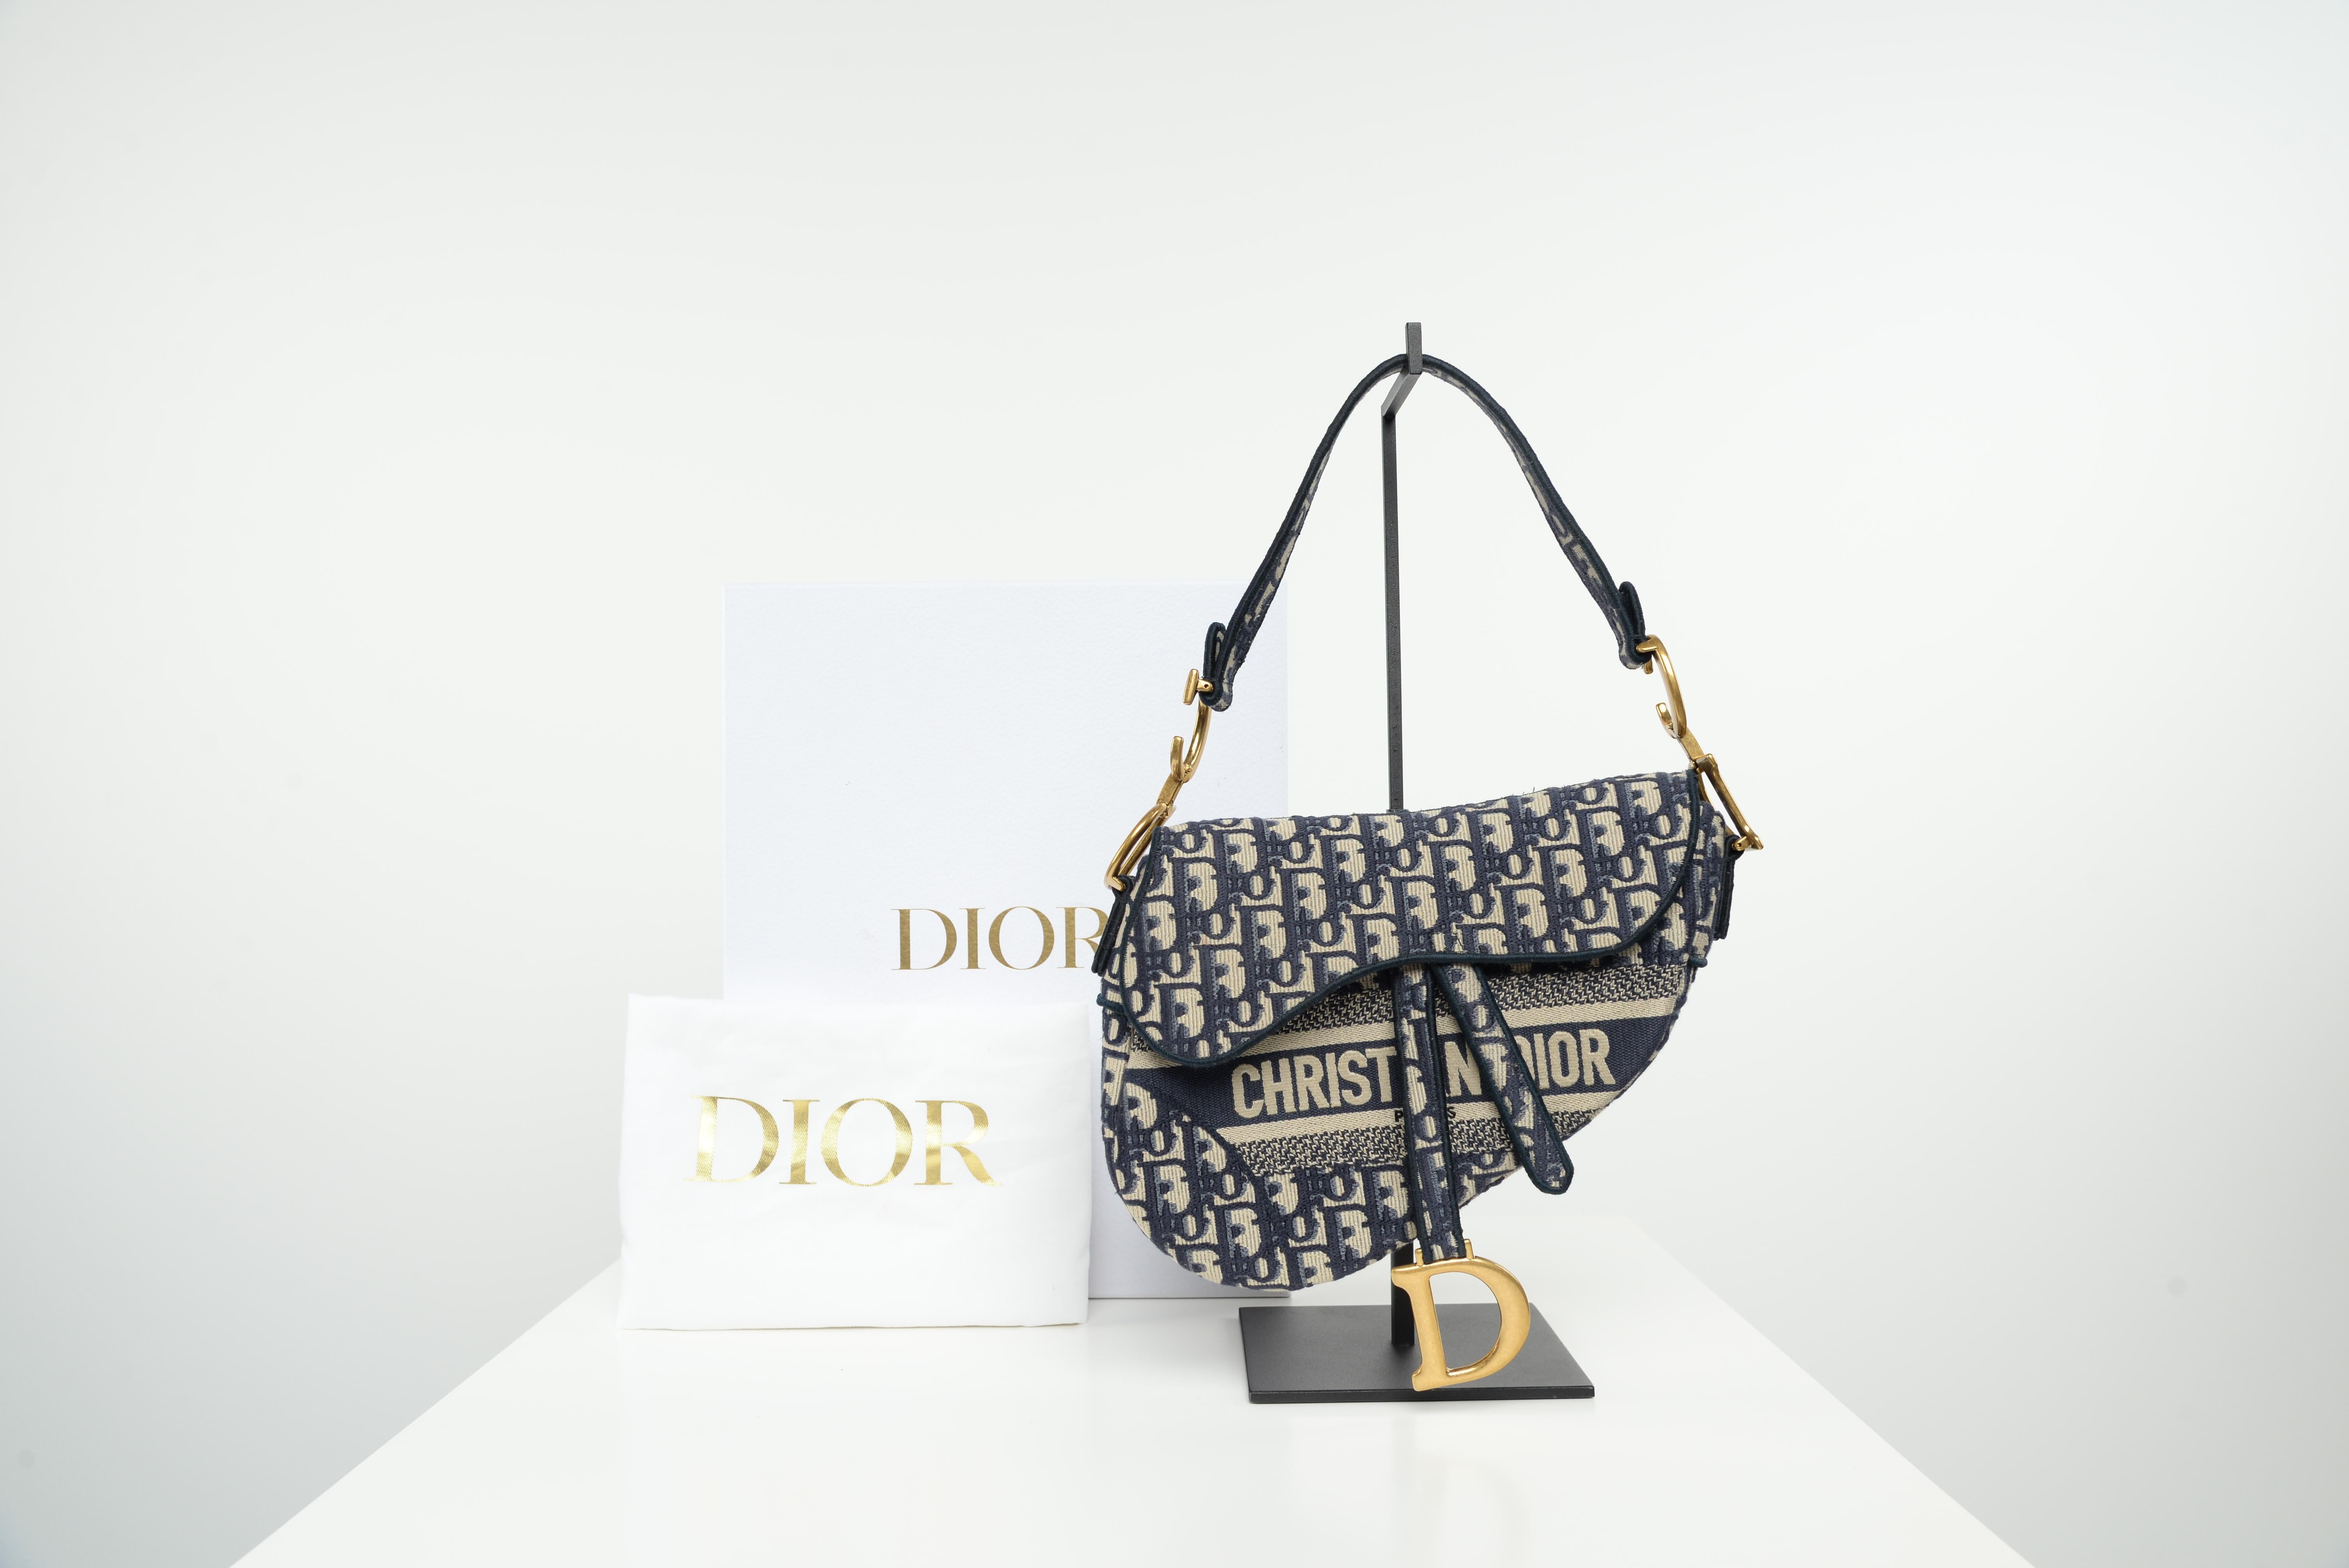 From the collection of SAVINETI we offer this Dior Saddle Bag Blue:
-	Brand: Dior
-	Model: Saddle Bag Blue
-	Year: 2021
-	Code: 50-MA-0251
-	Condition: Very Good
-       Extras: Full-Set (dustbag, box and receipt)

Maria Grazia Chiuri brings a fresh